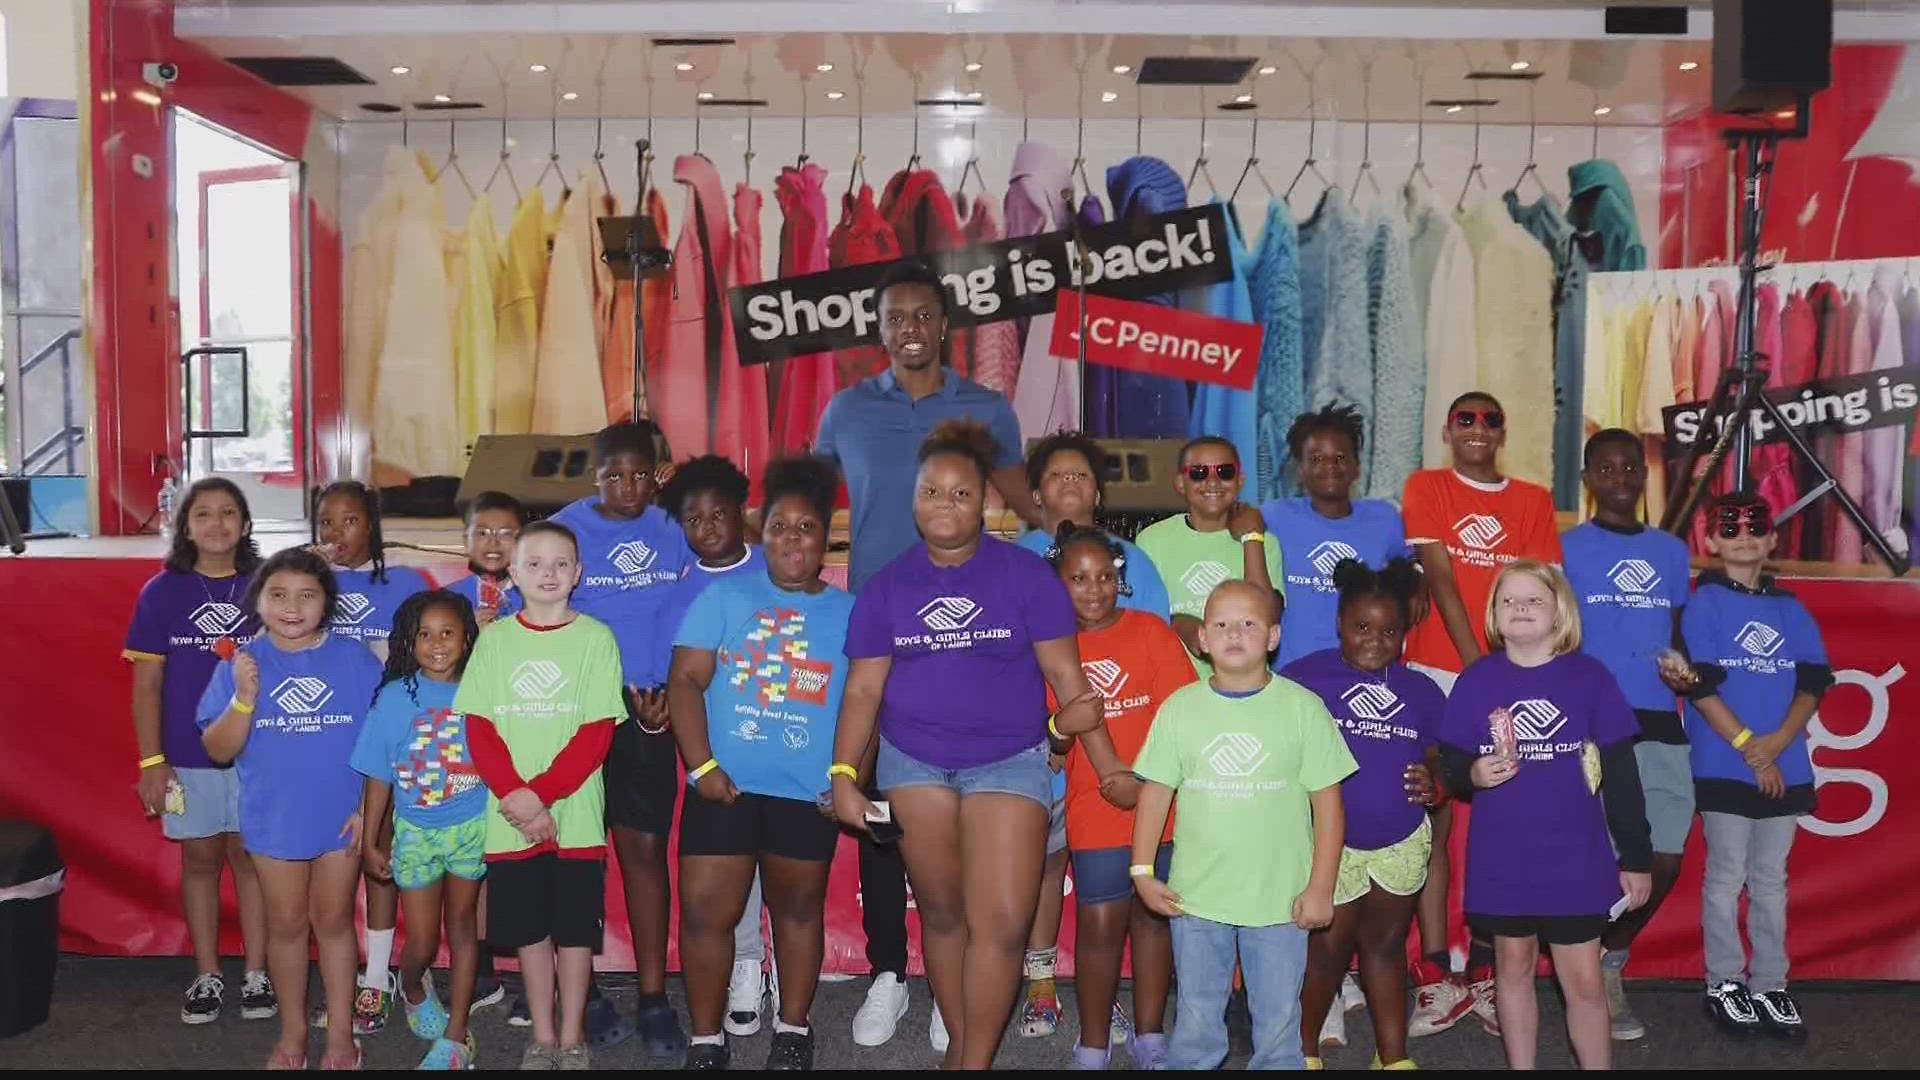 The event was held in partnership with the Boys and Girls Club and JCPenney.